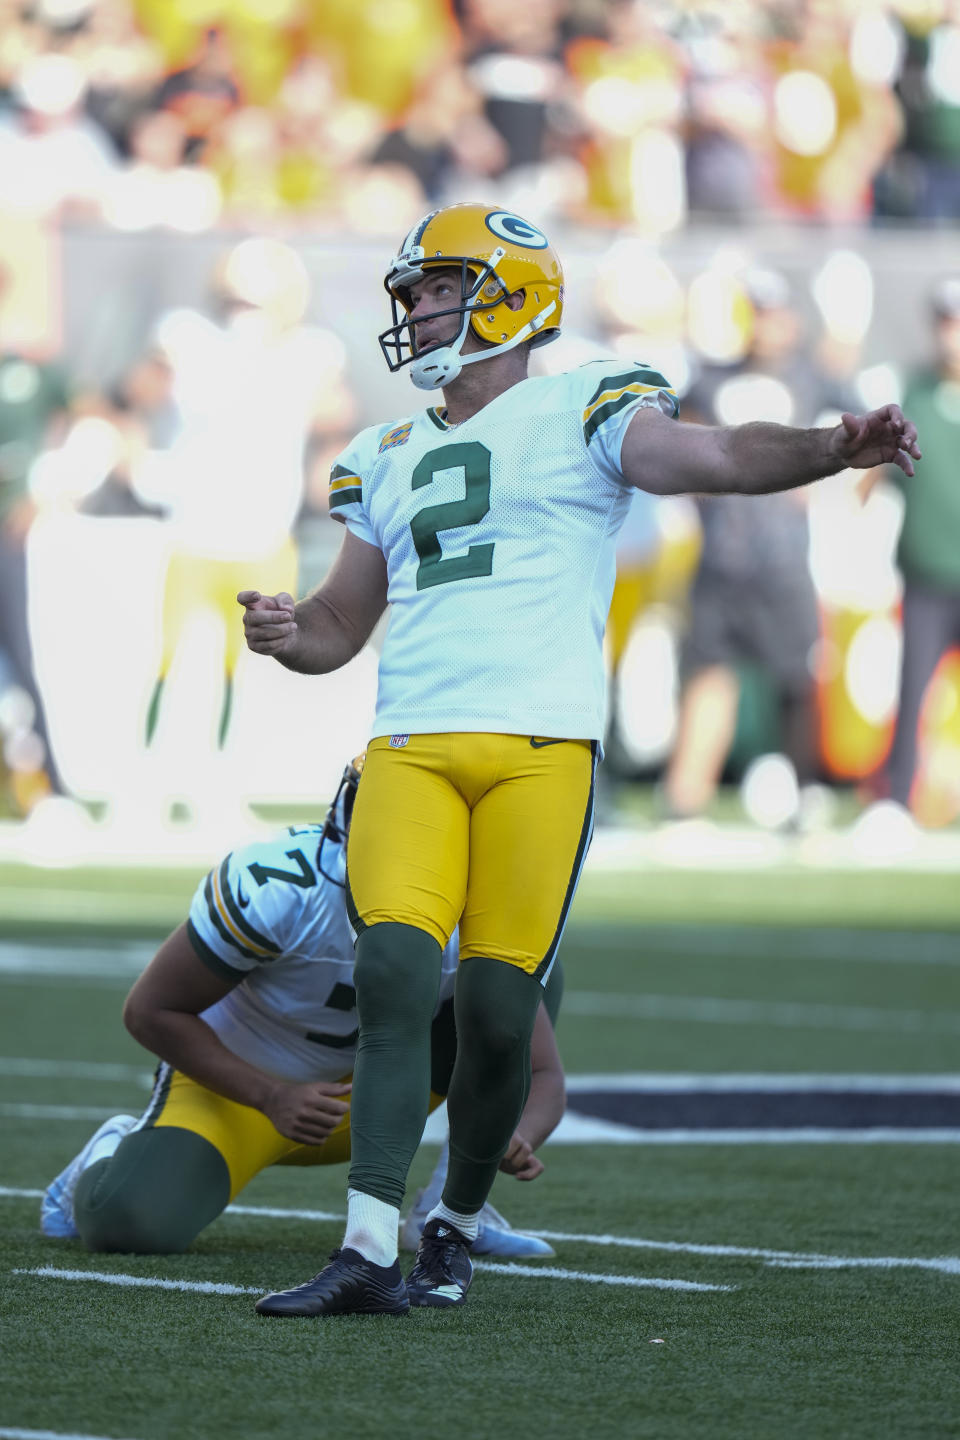 Green Bay Packers kicker Mason Crosby (2) kicks a winning field goal from the hold of Corey Bojorquez during overtime in an NFL football game against the Cincinnati Bengals in Cincinnati, Sunday, Oct. 10, 2021. (AP Photo/AJ Mast)